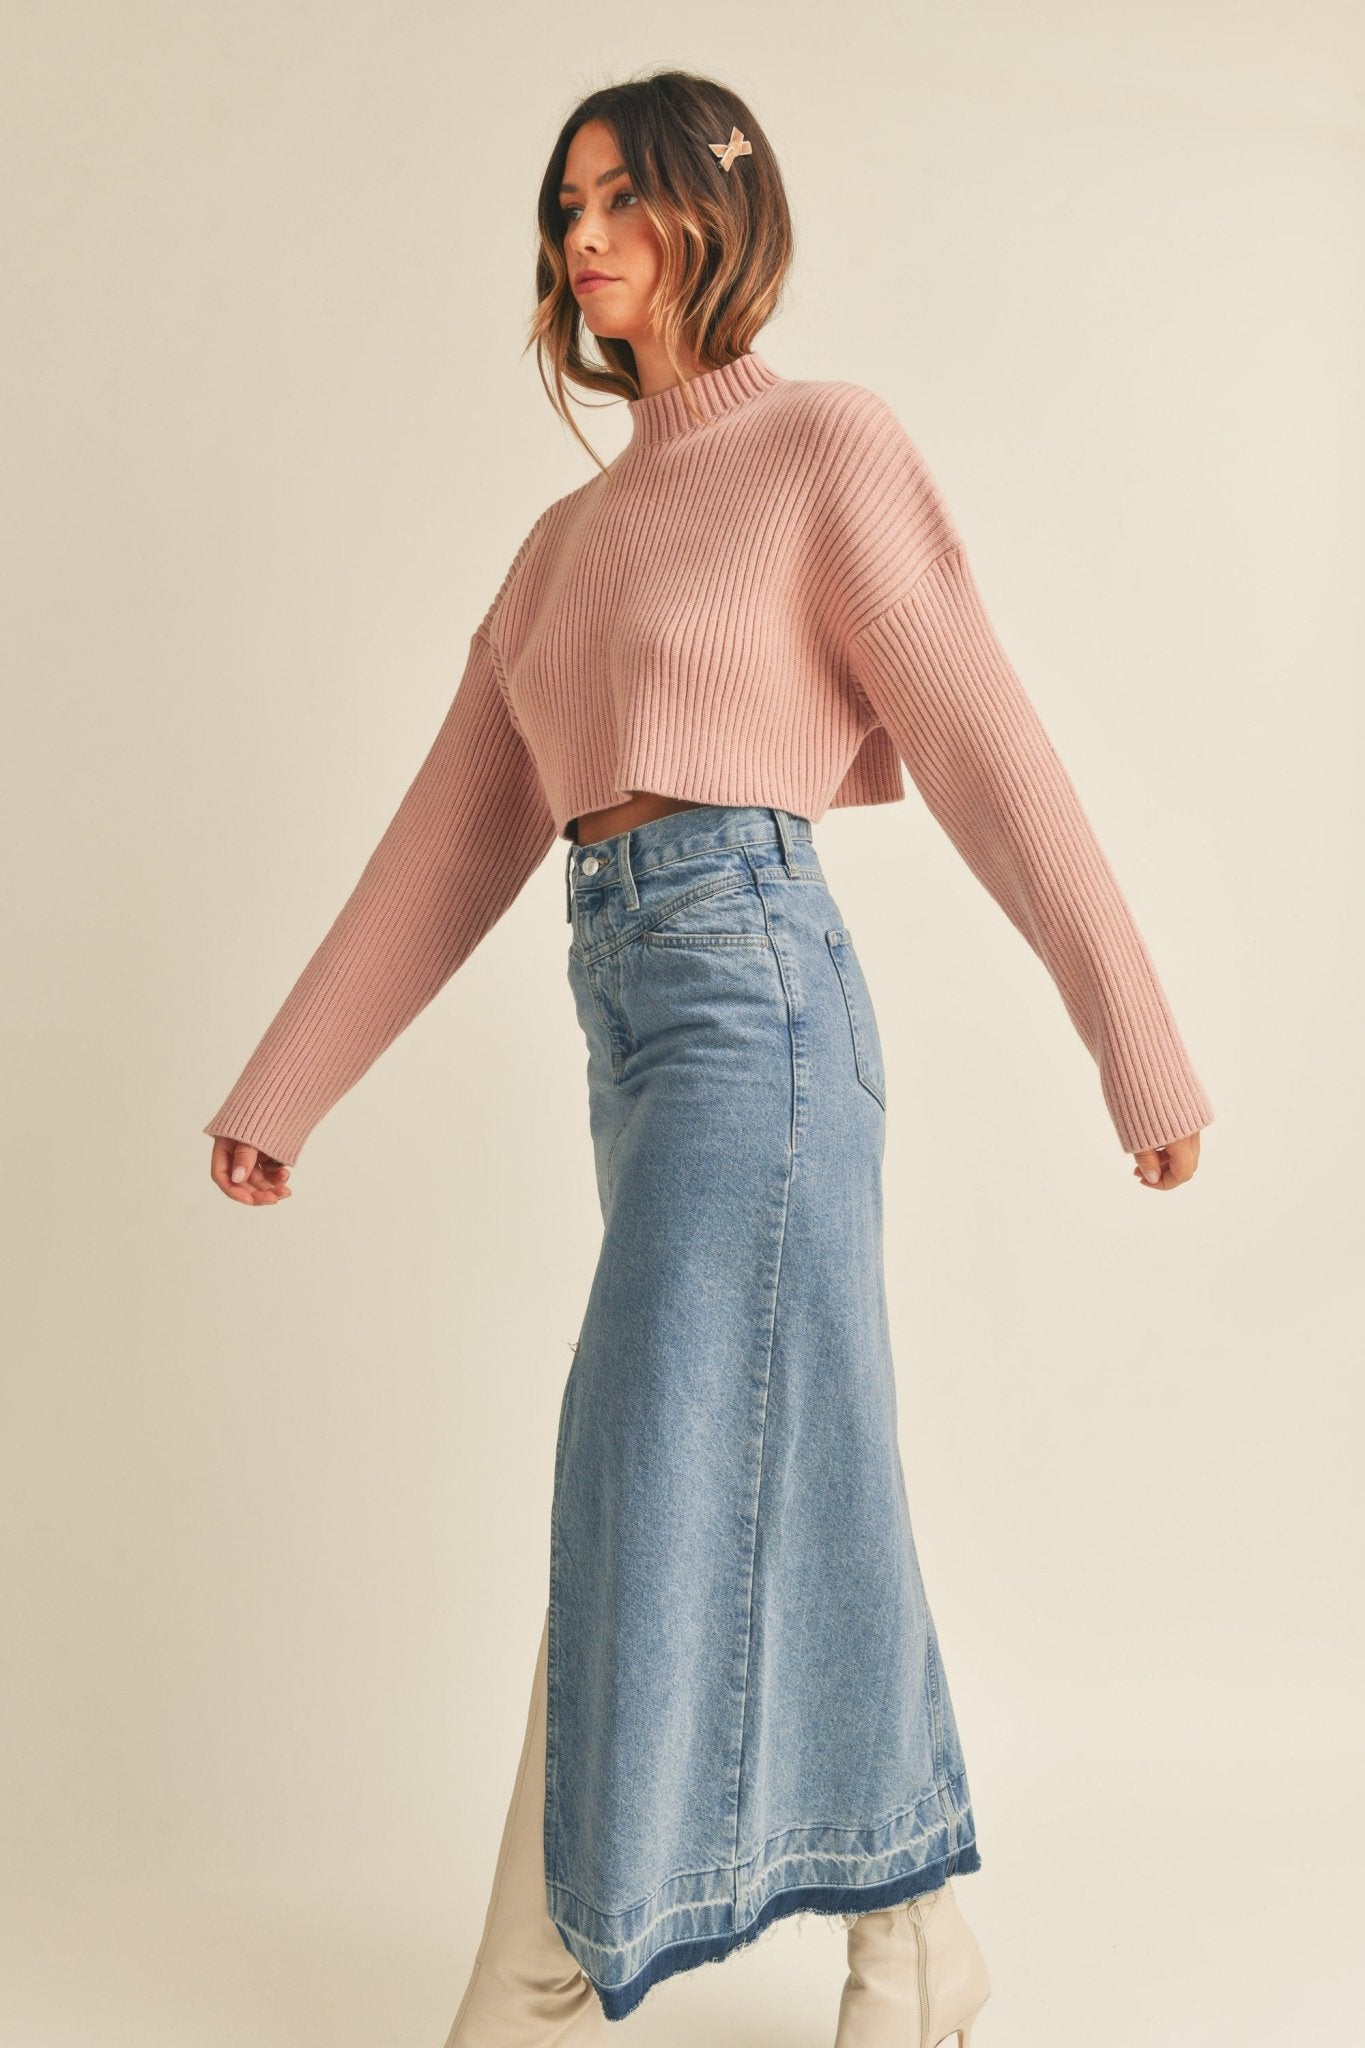 Ribbed Dusty Rose Sweater - Styled by Ashley Brooke